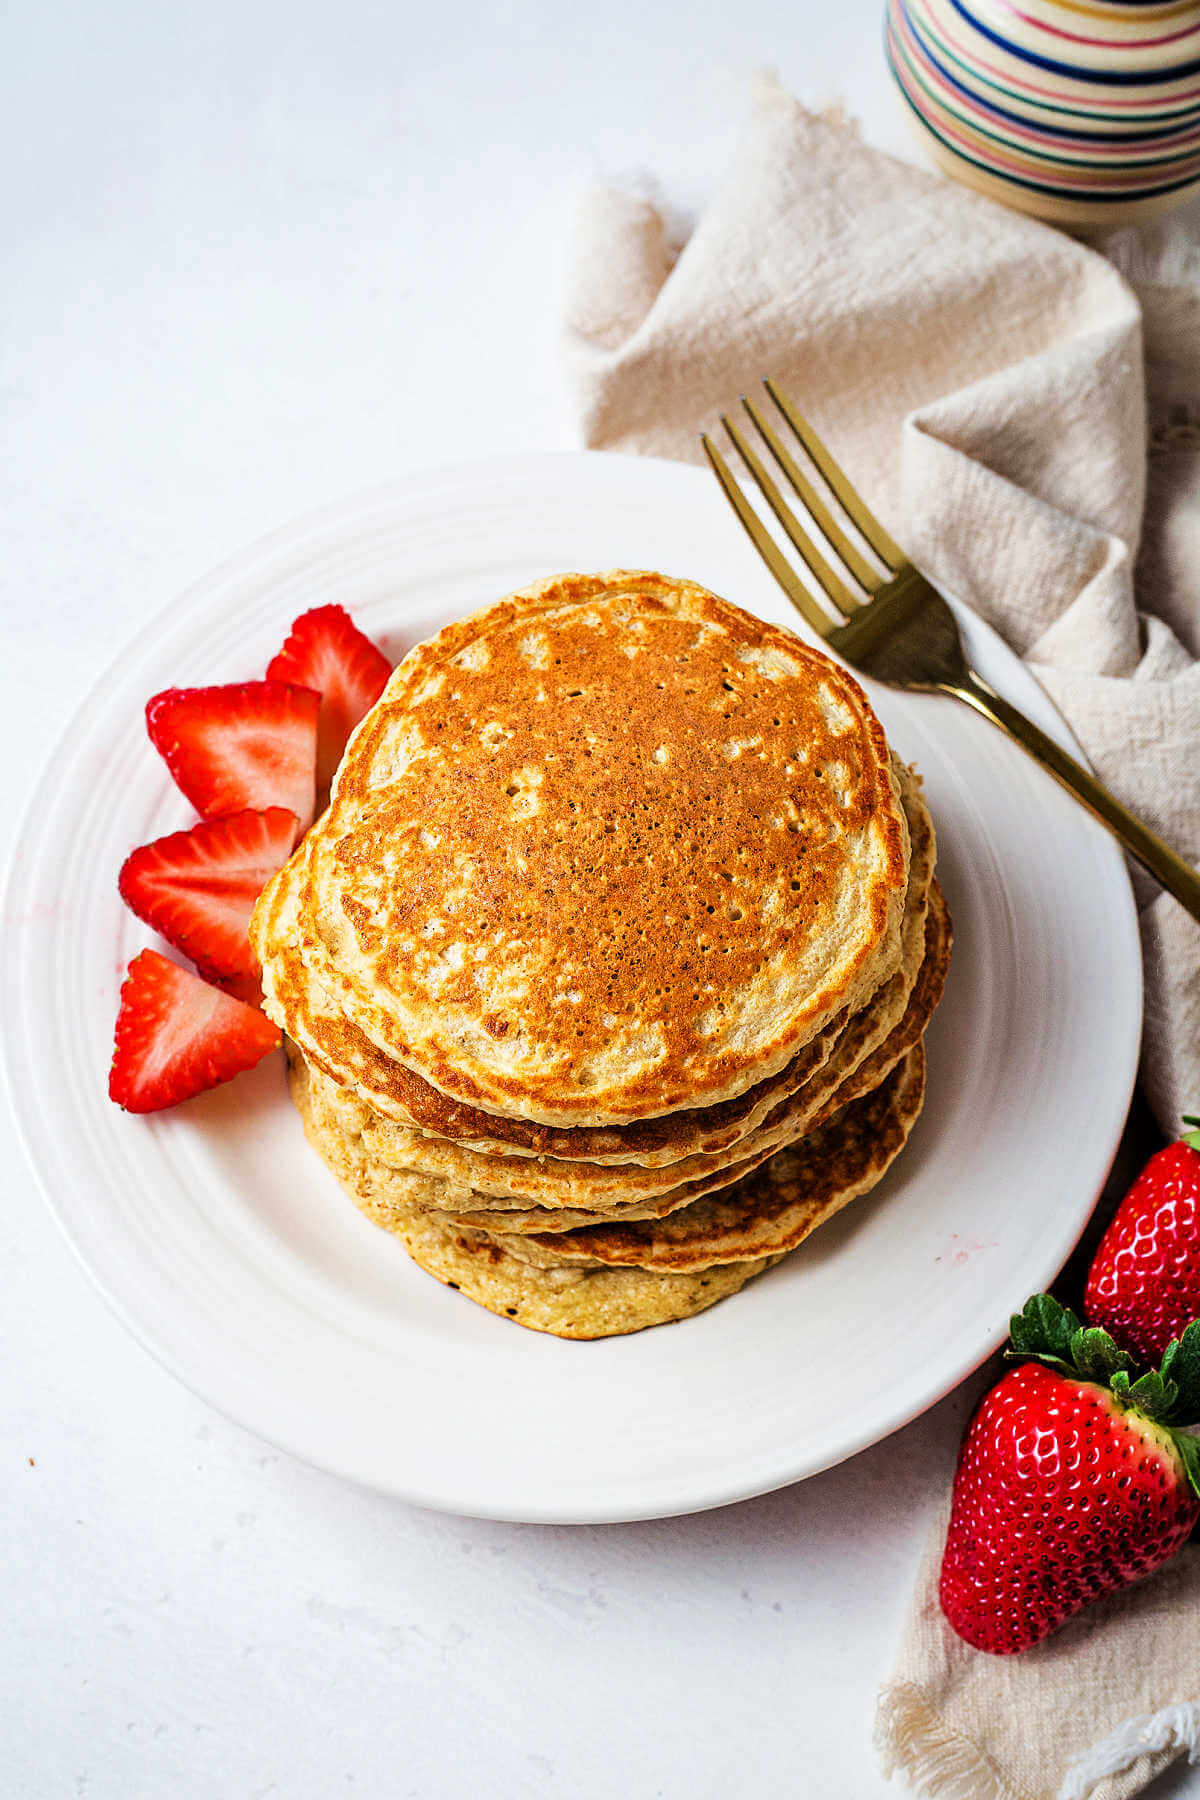 A stack of oat flour pancakes on a plate with sliced strawberries and a fork on the side.